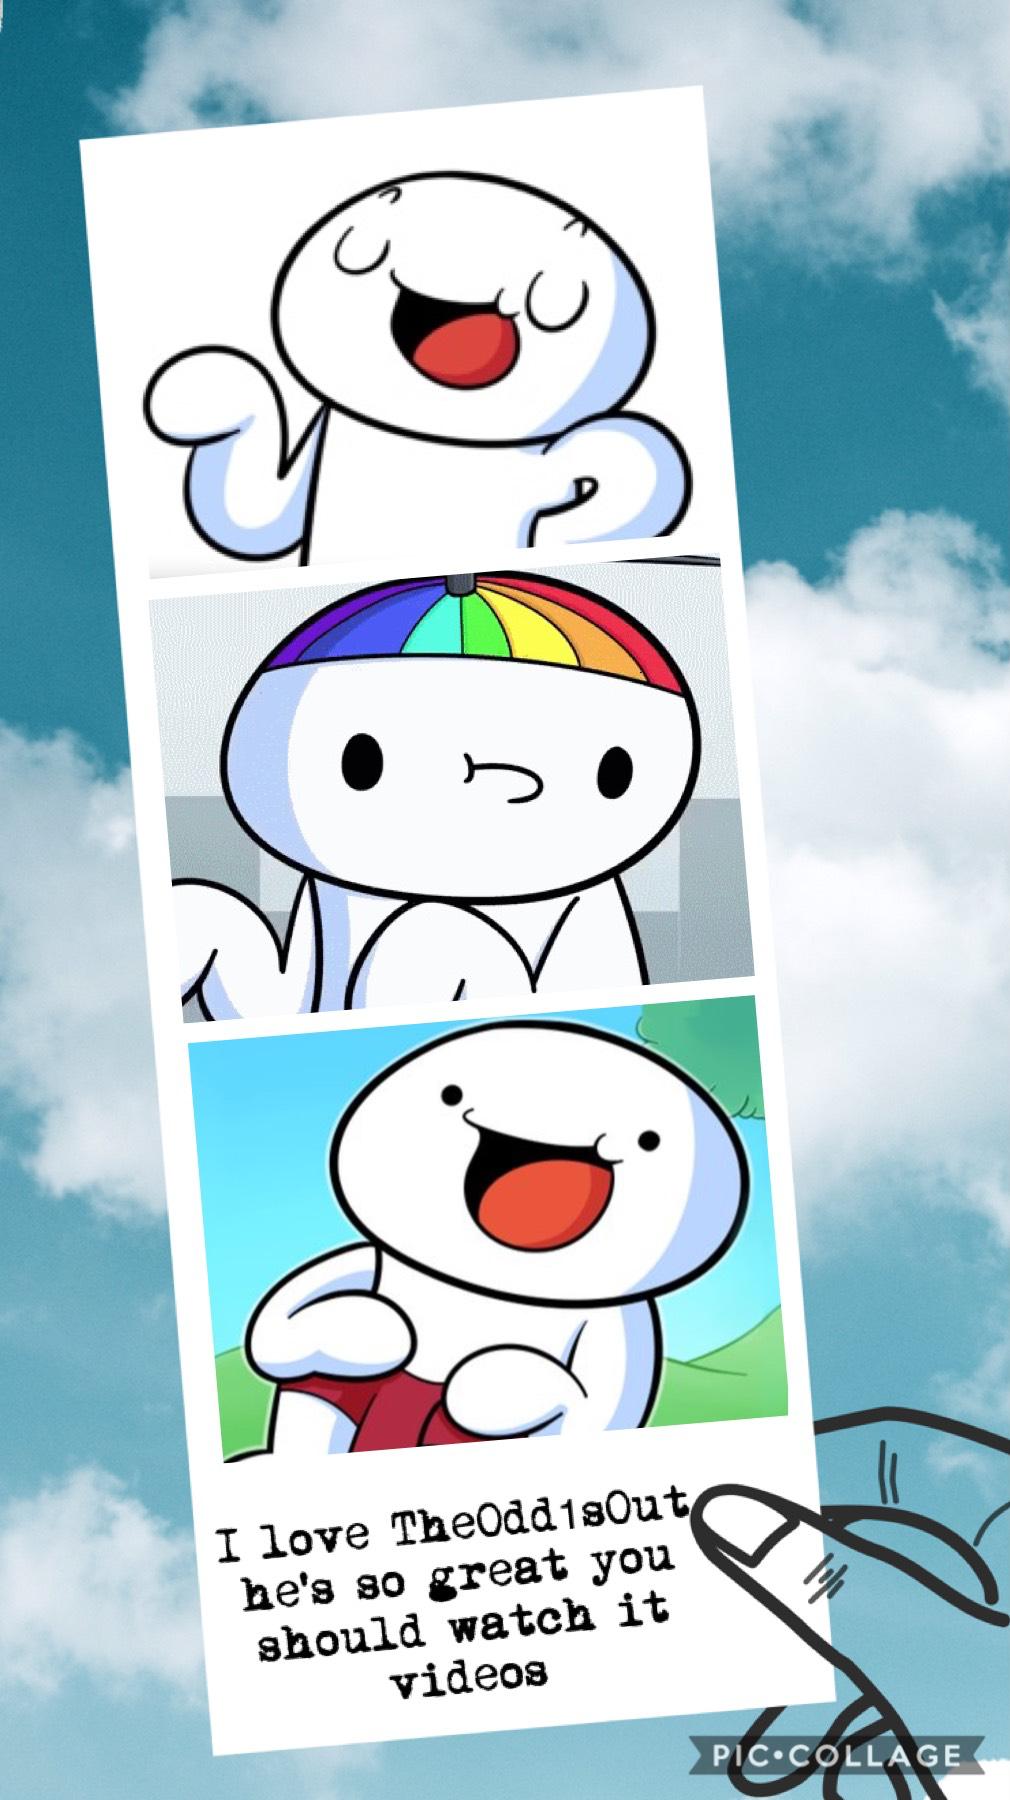 Look up TheOdd1sOut